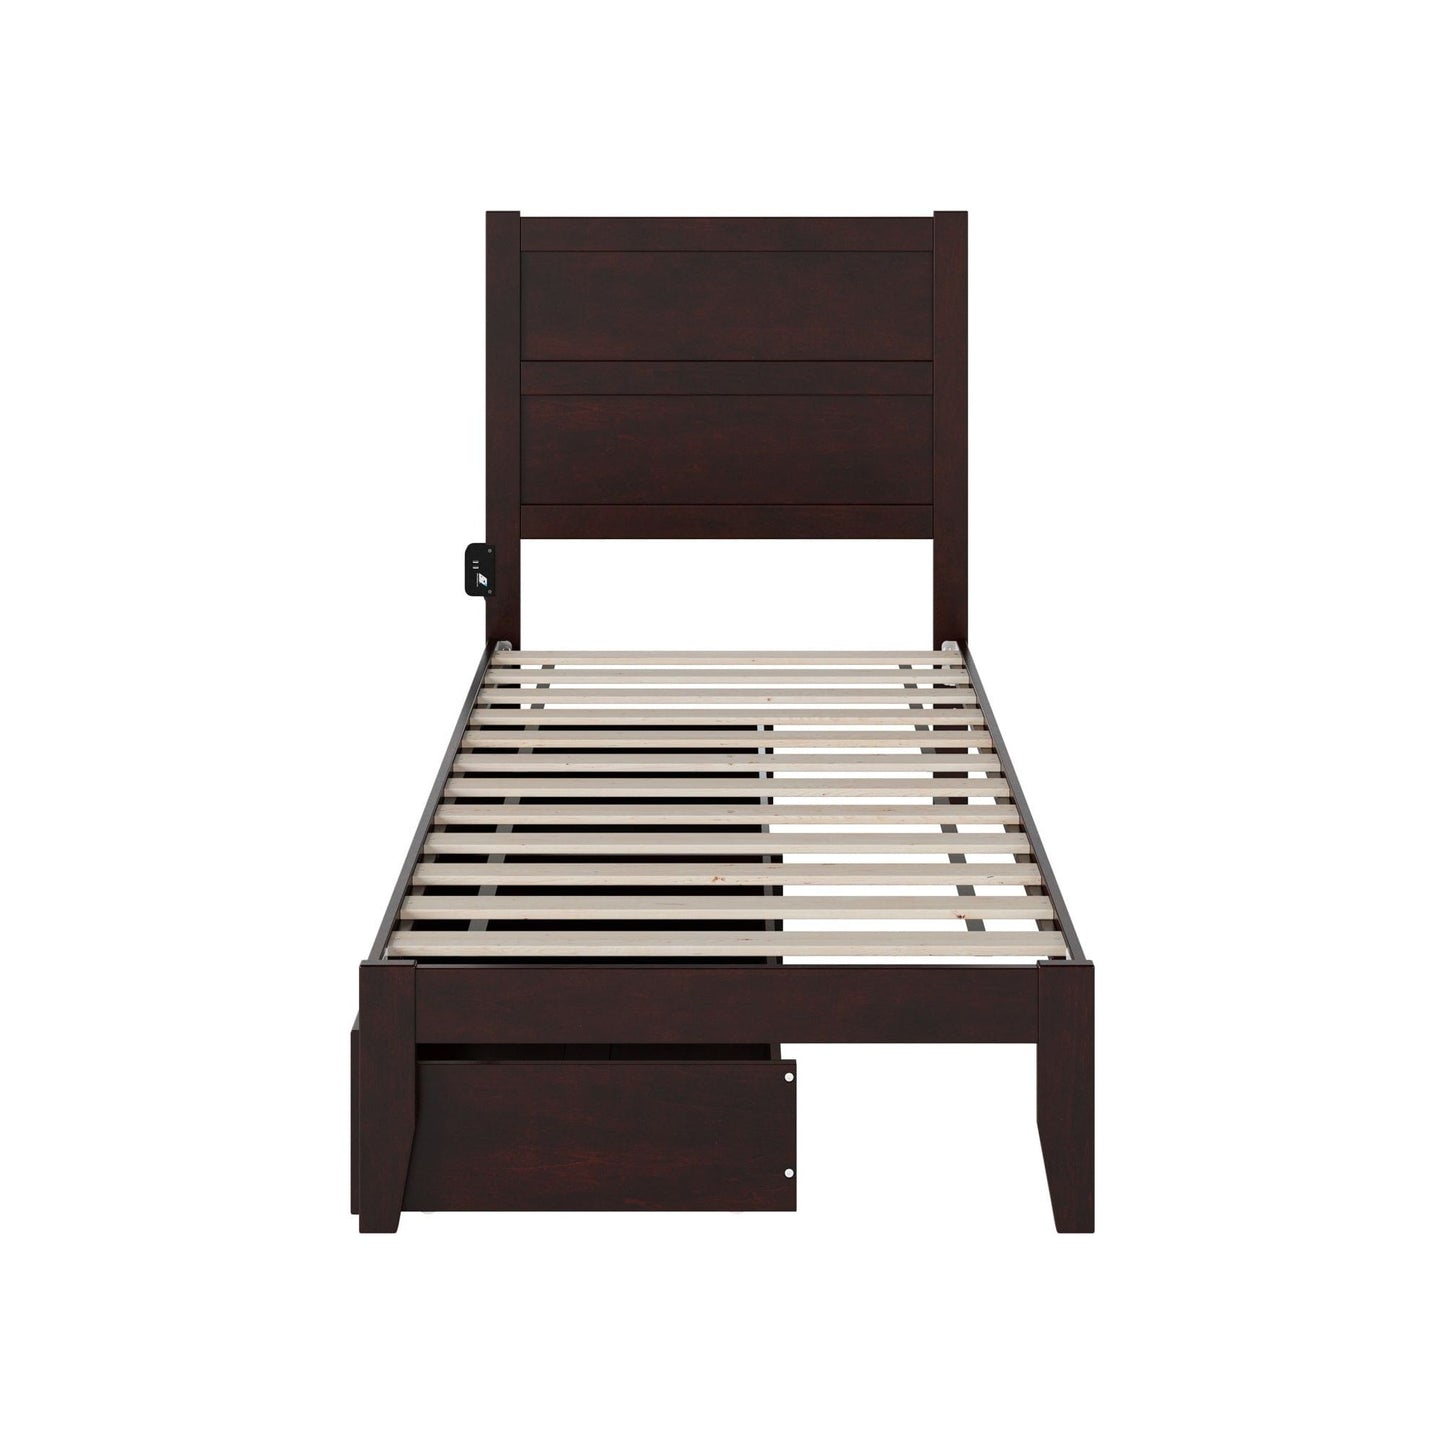 AFI Furnishings NoHo Twin Bed with 2 Drawers in Espresso